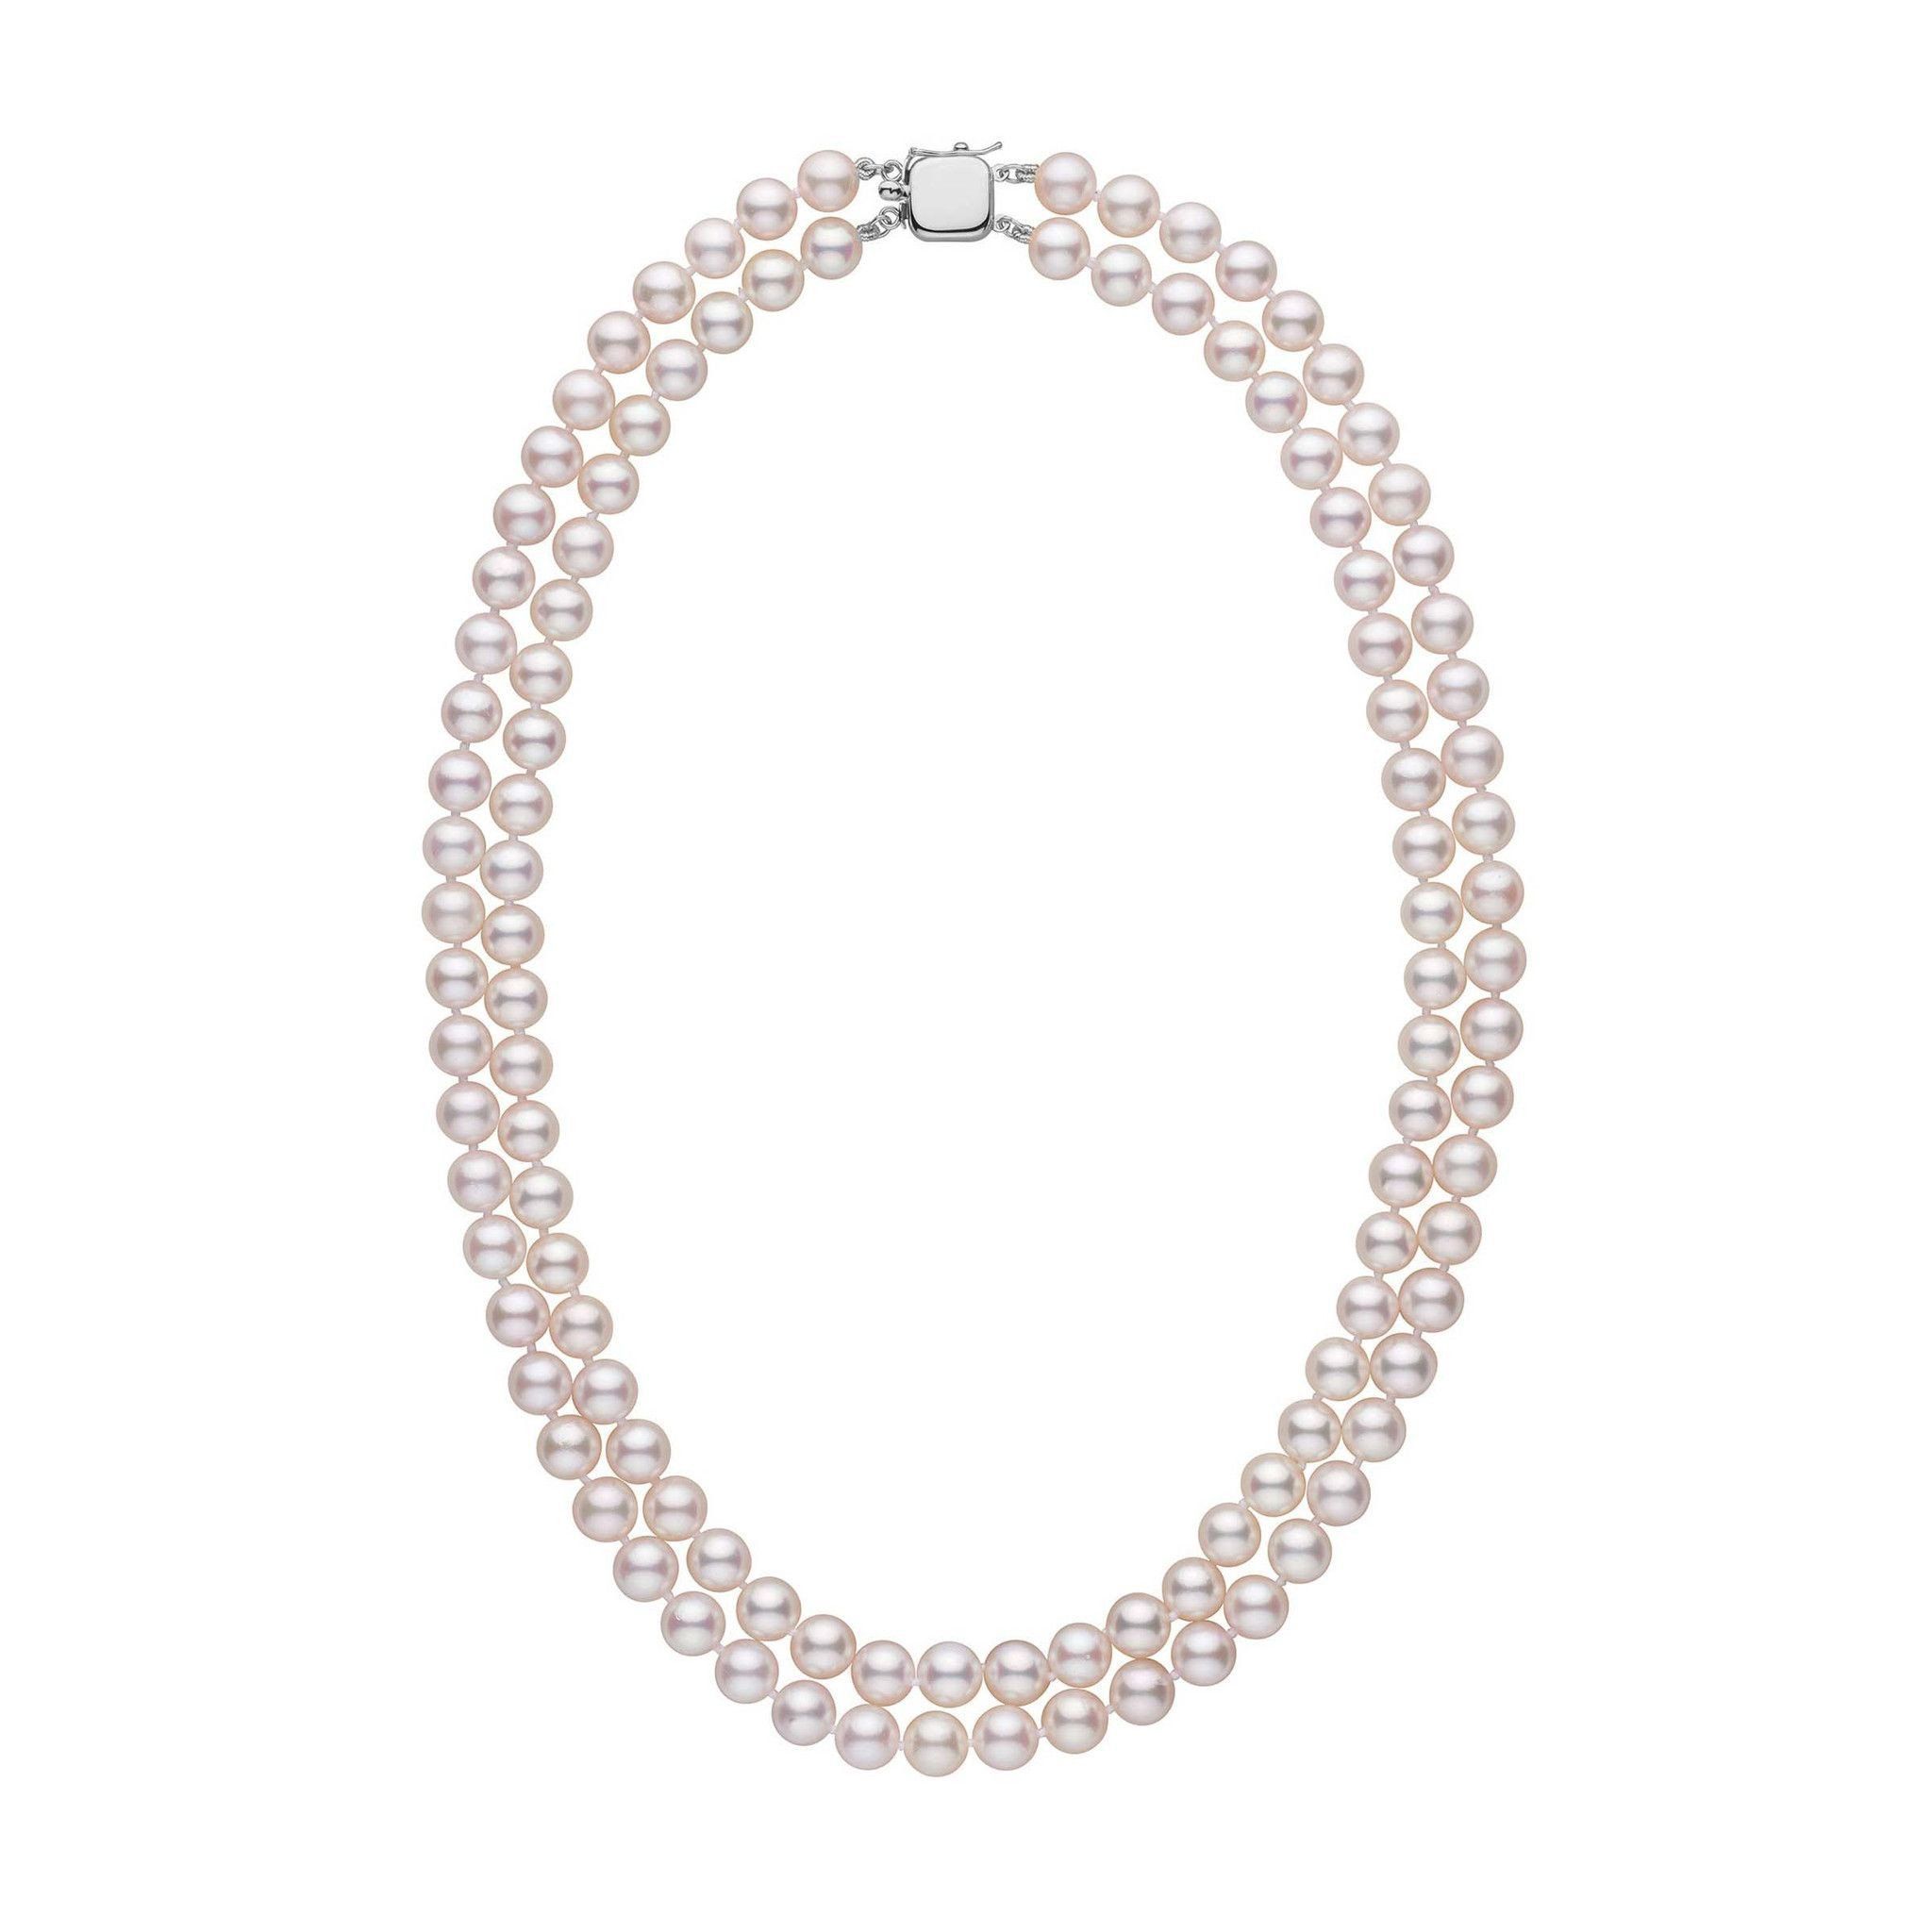 6.5-7.0 mm 18-inch Double-Strand White Akoya AAA Pearl Necklace White Gold